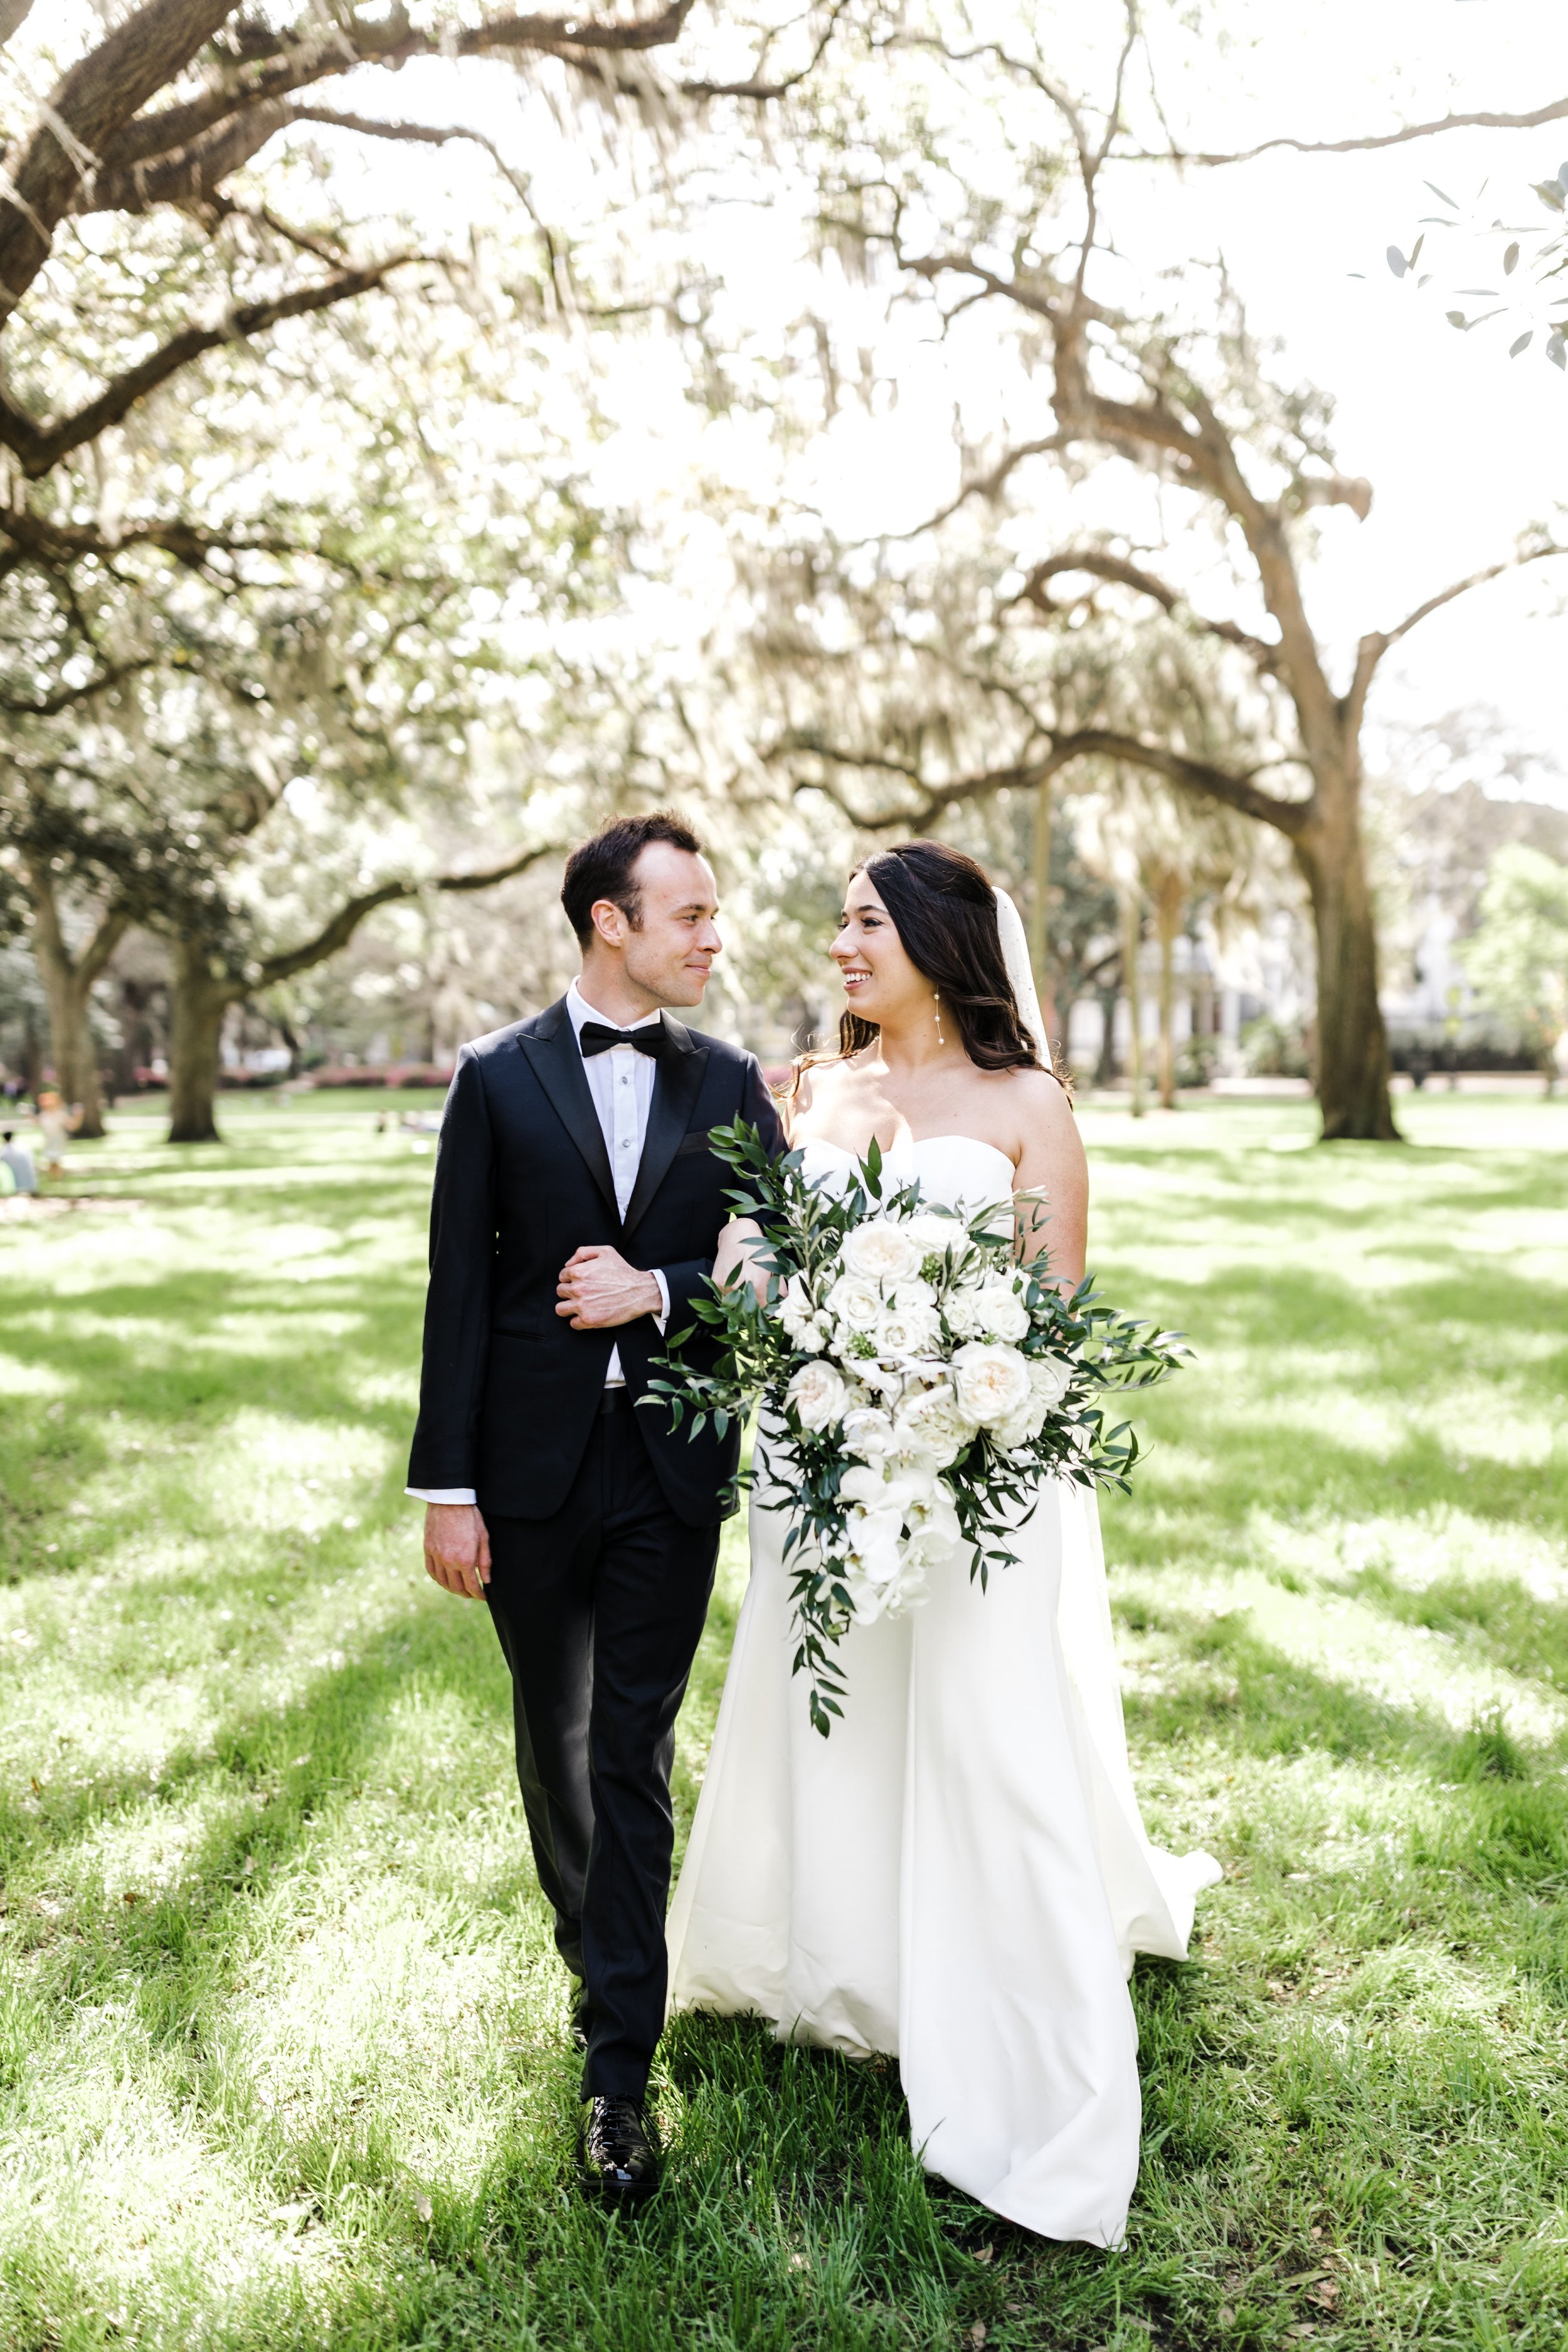 ivory-and-beau-wedding-and-florals-annelise-and-preston-wedding-blog-savannah-wedding-savannah-wedding-coordinator-savannah-florsit-wedding-florist-southern-wedding-forsyth-park-fountain-soho-south-savannah-wedding-gmp20199345-206.jpg